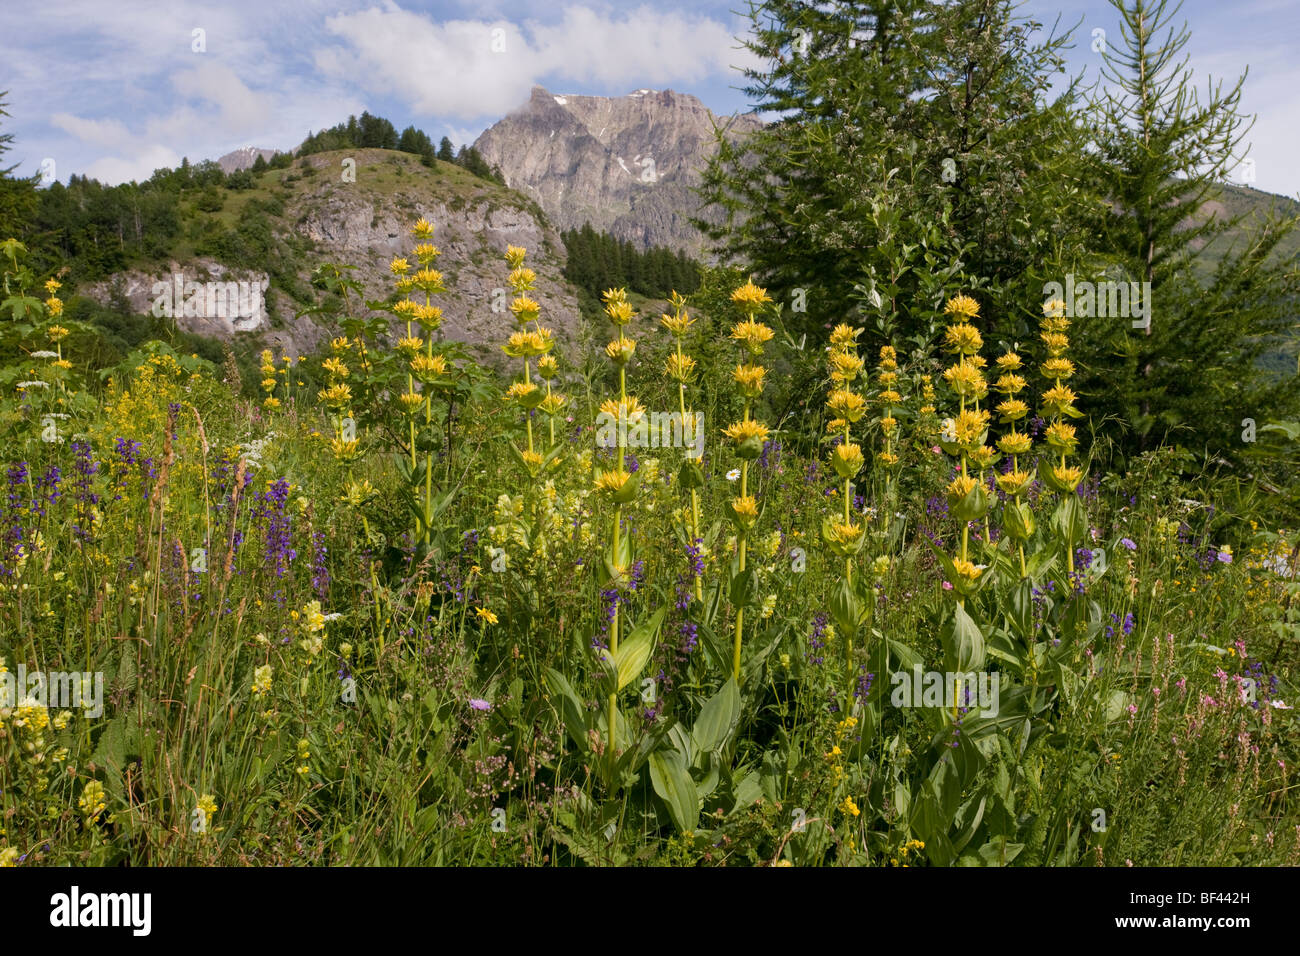 Yellow Gentian Gentiana lutea in flowery meadow in the Narreyroux valley, the Ecrins National Park, French Alps, France Stock Photo